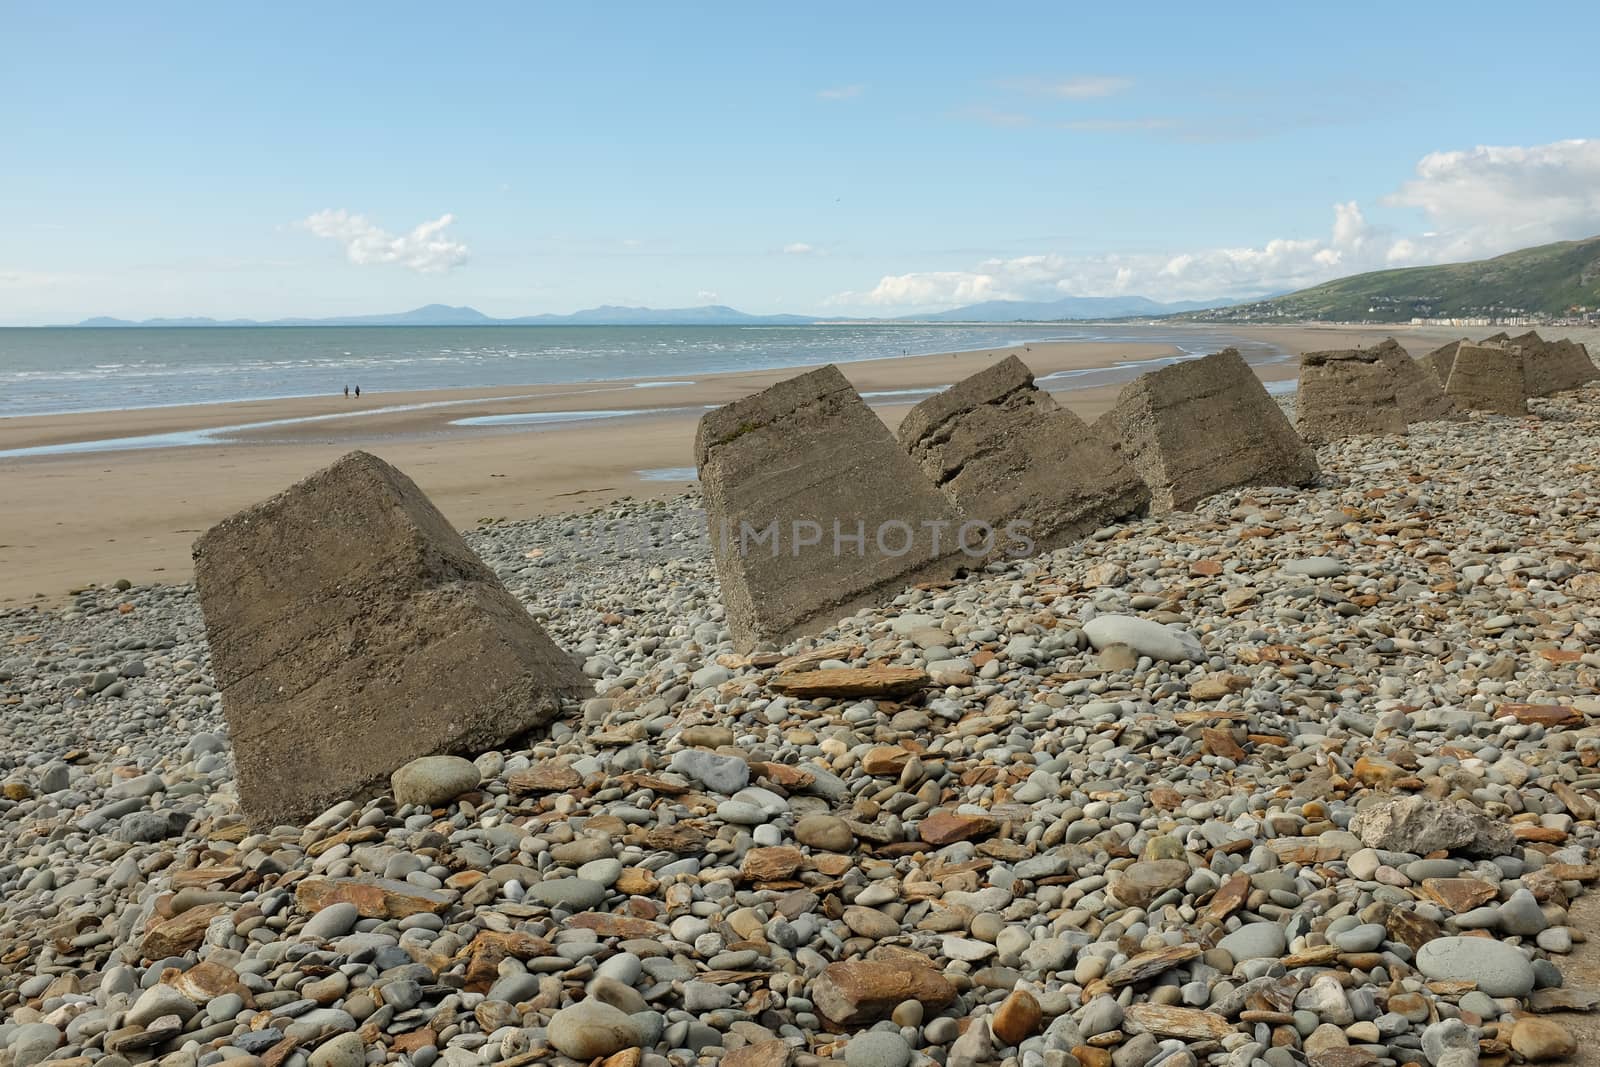 Fairbourne sea defences. by richsouthwales